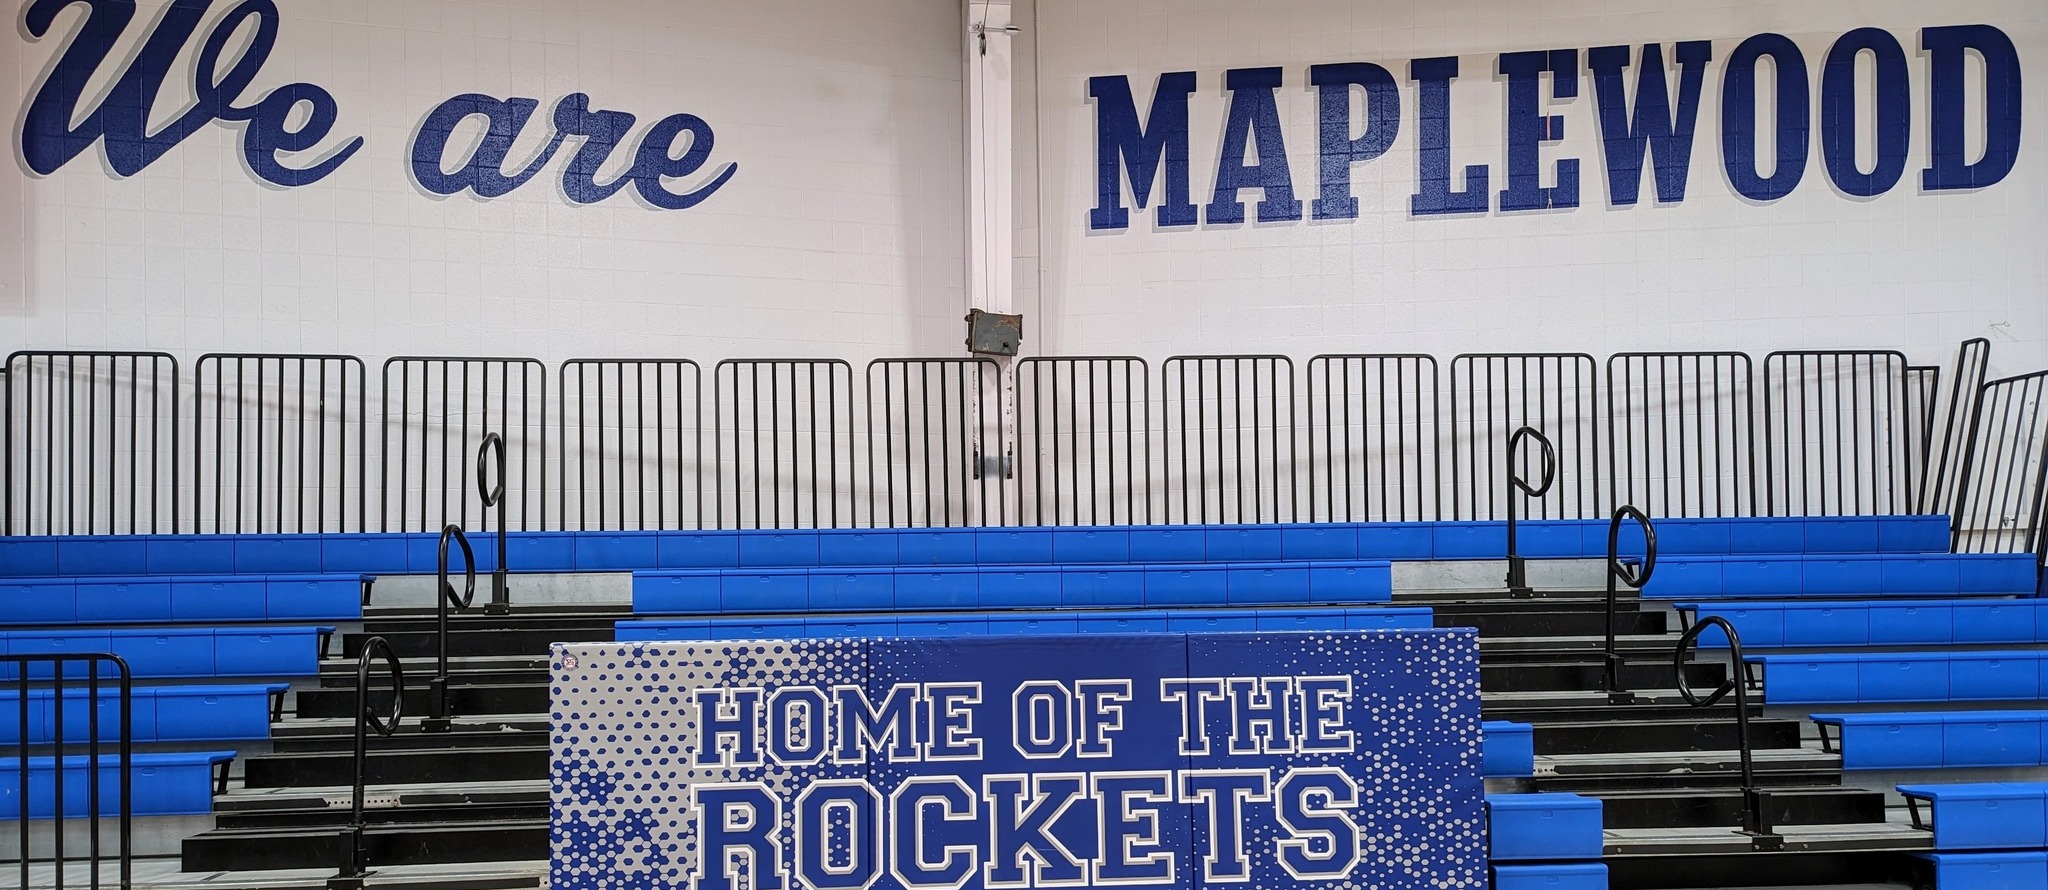 We are Maplewood Home of the Rockets gym. 